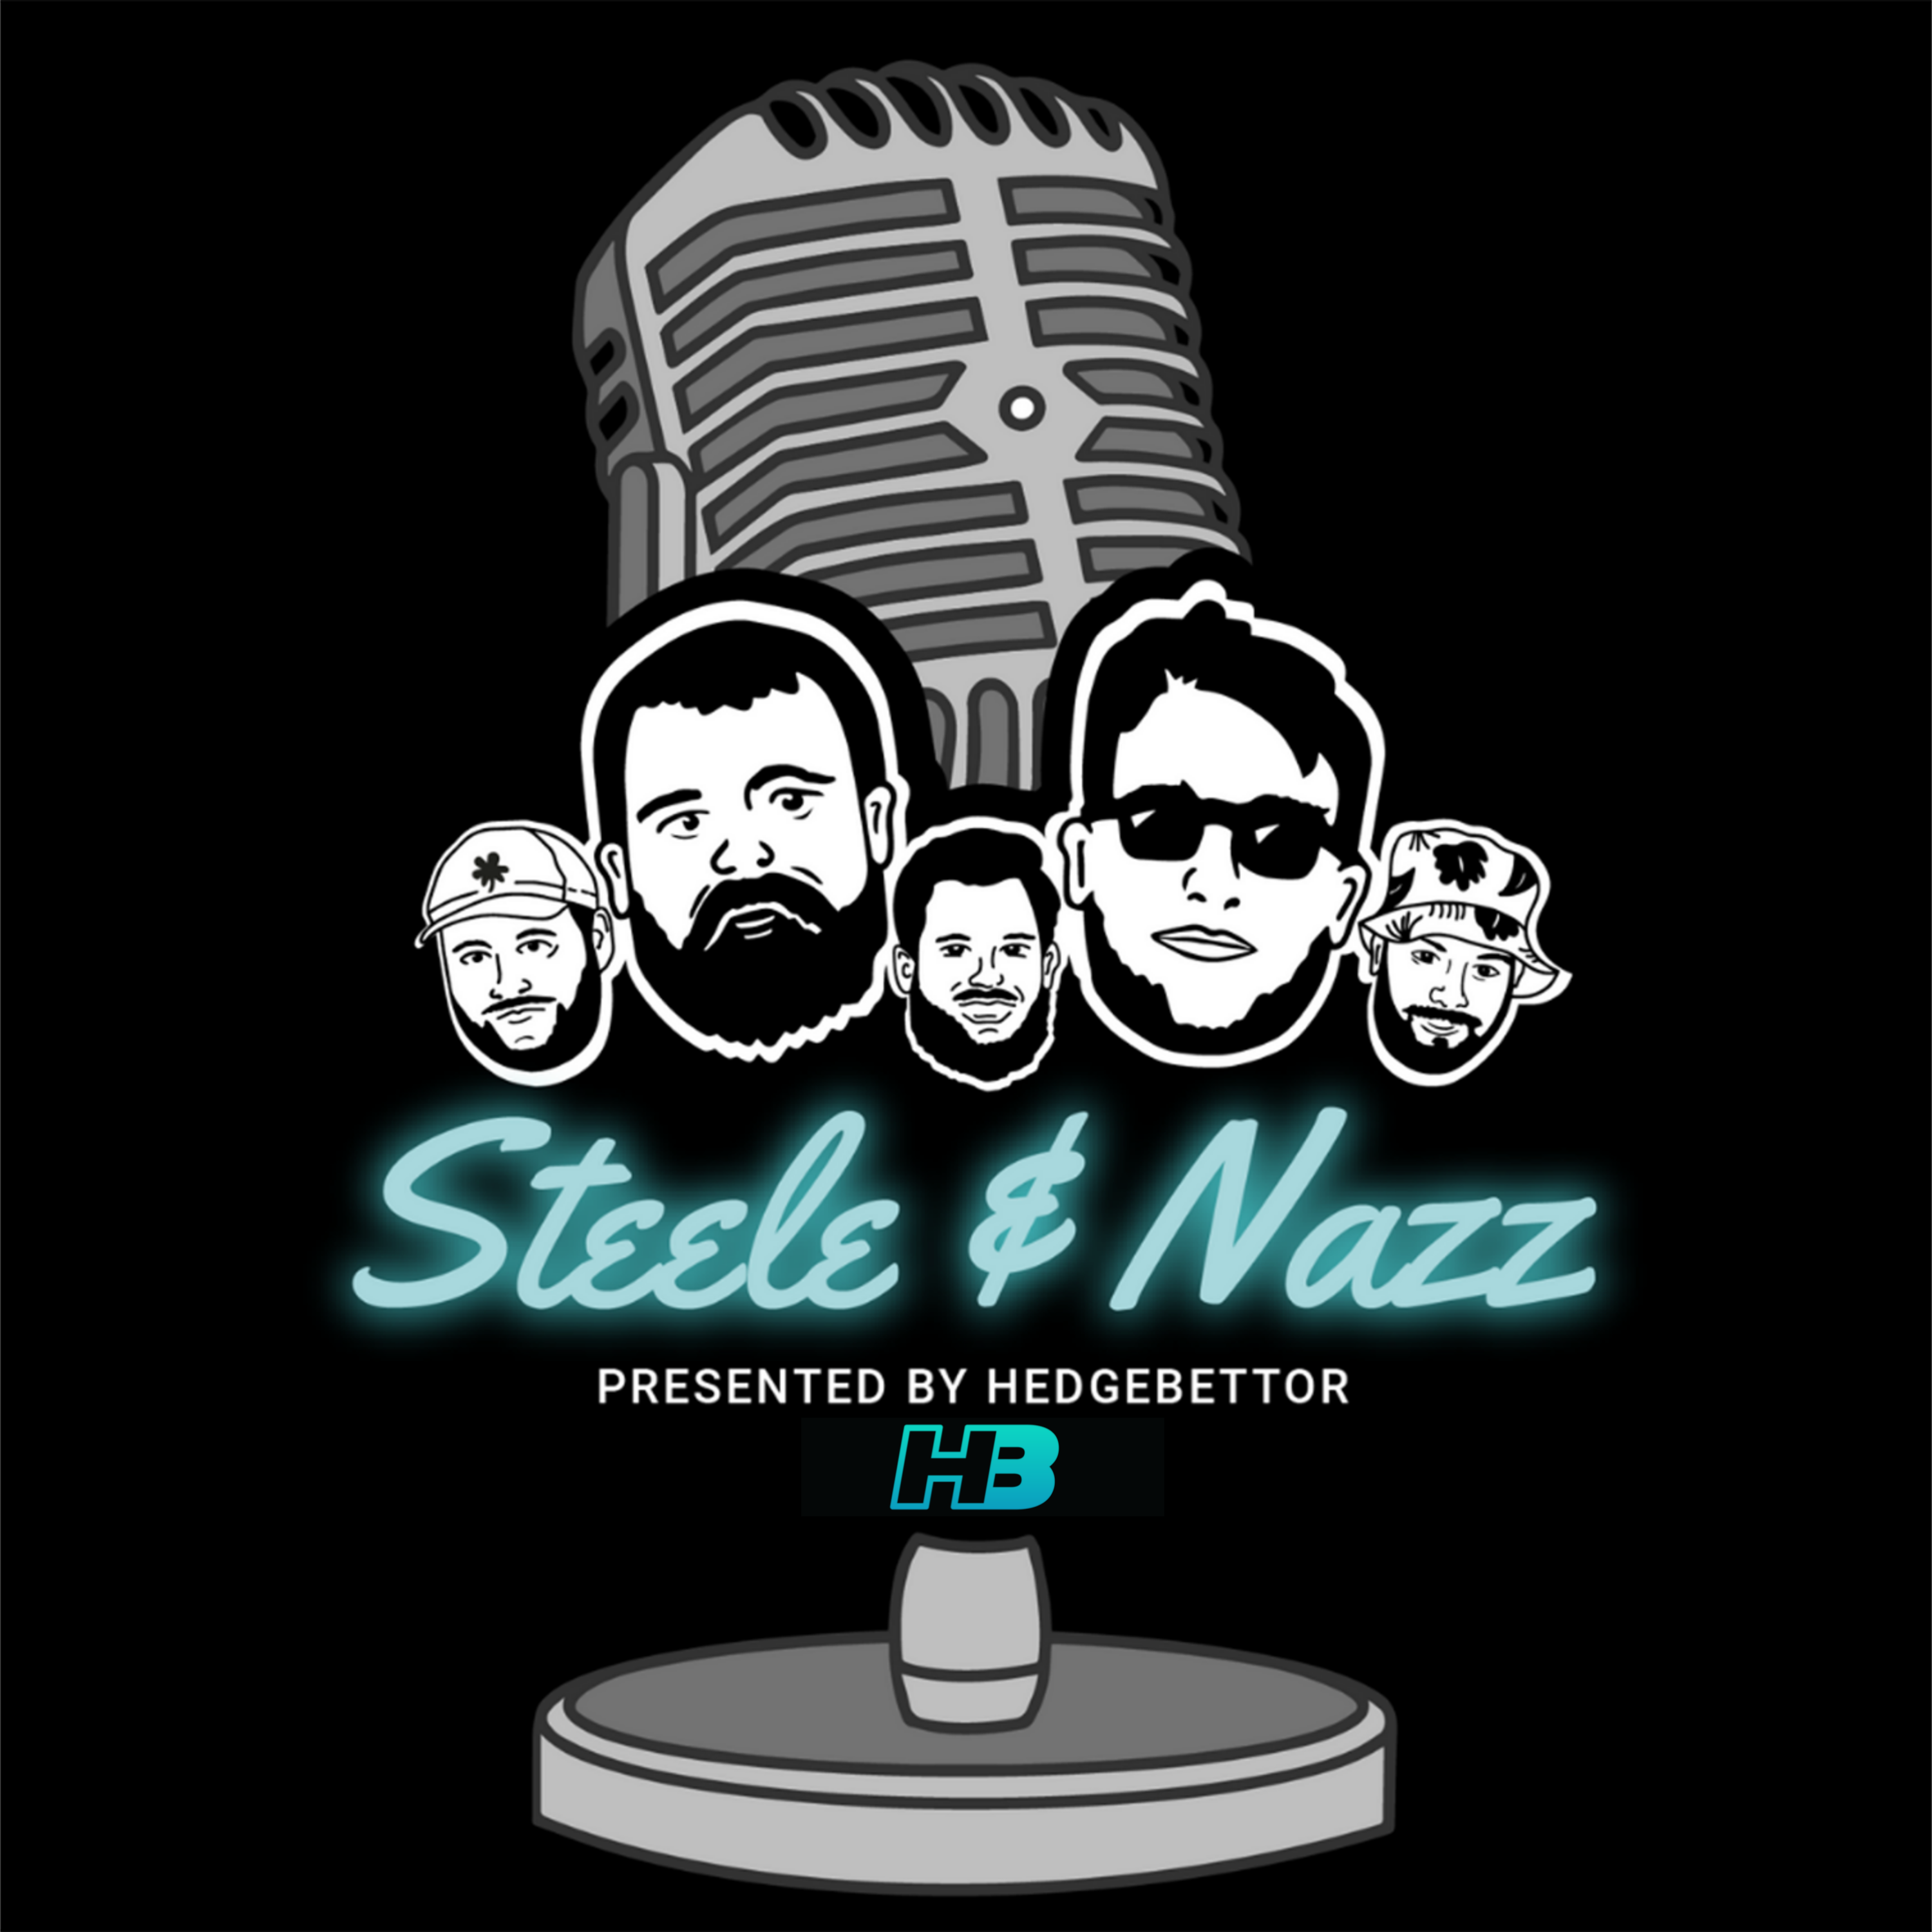 Ep. 100 - Steele & Nazz hit the century mark, Pats/Jets preview, Bruins & Celtics so hot right now